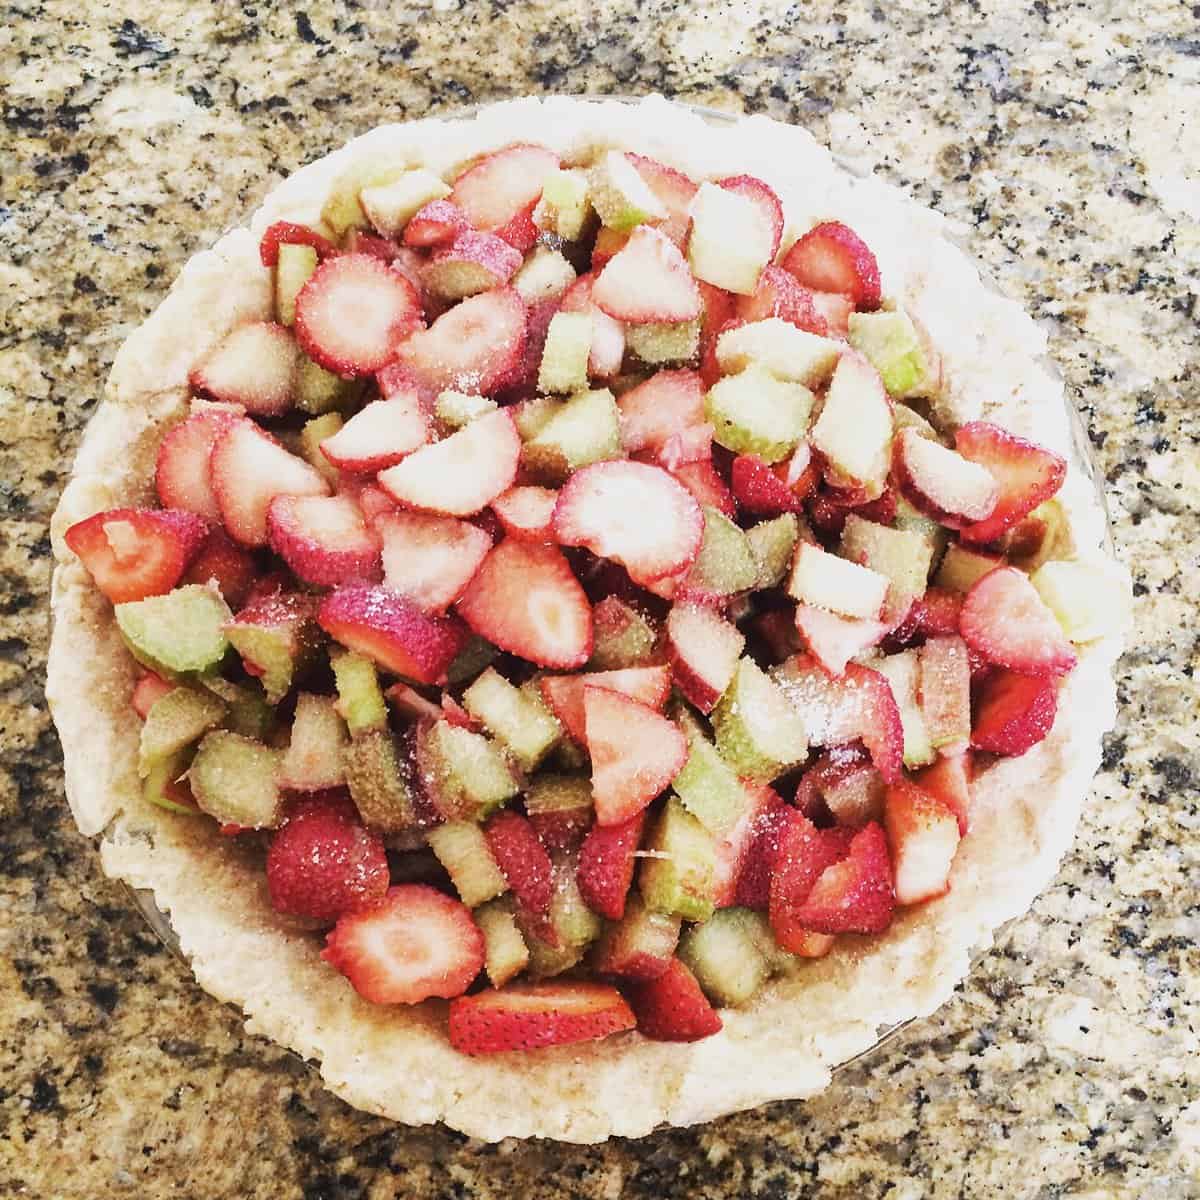 The filling for strawberry rhubarb puie with honey in a pie crust.